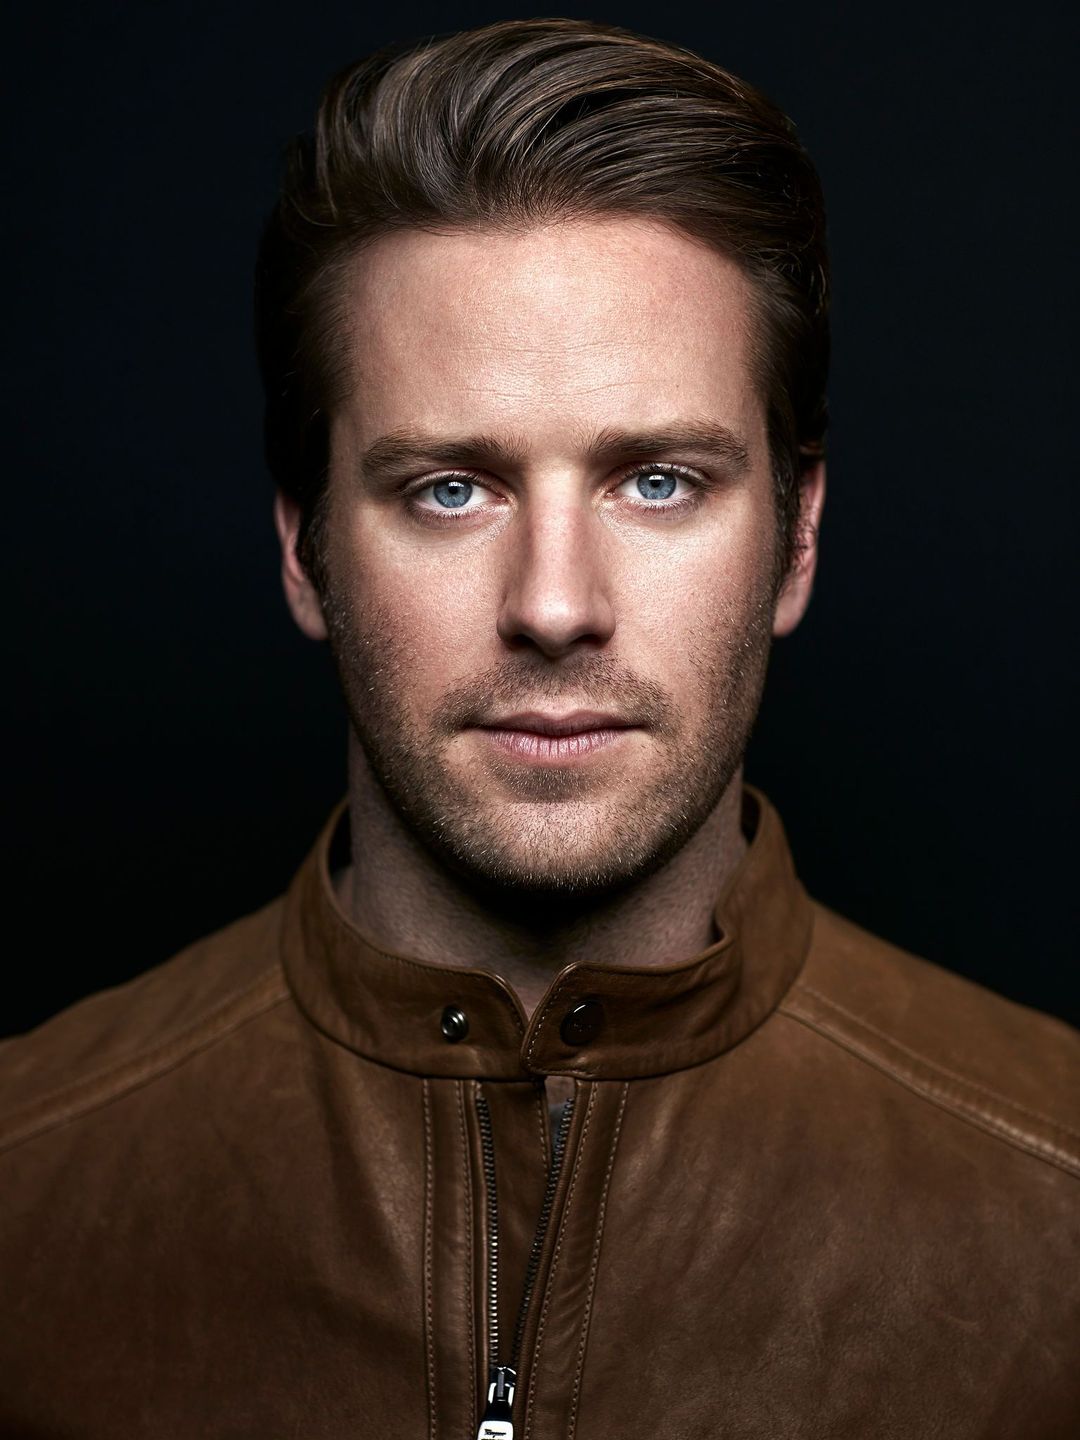 Armie Hammer current look